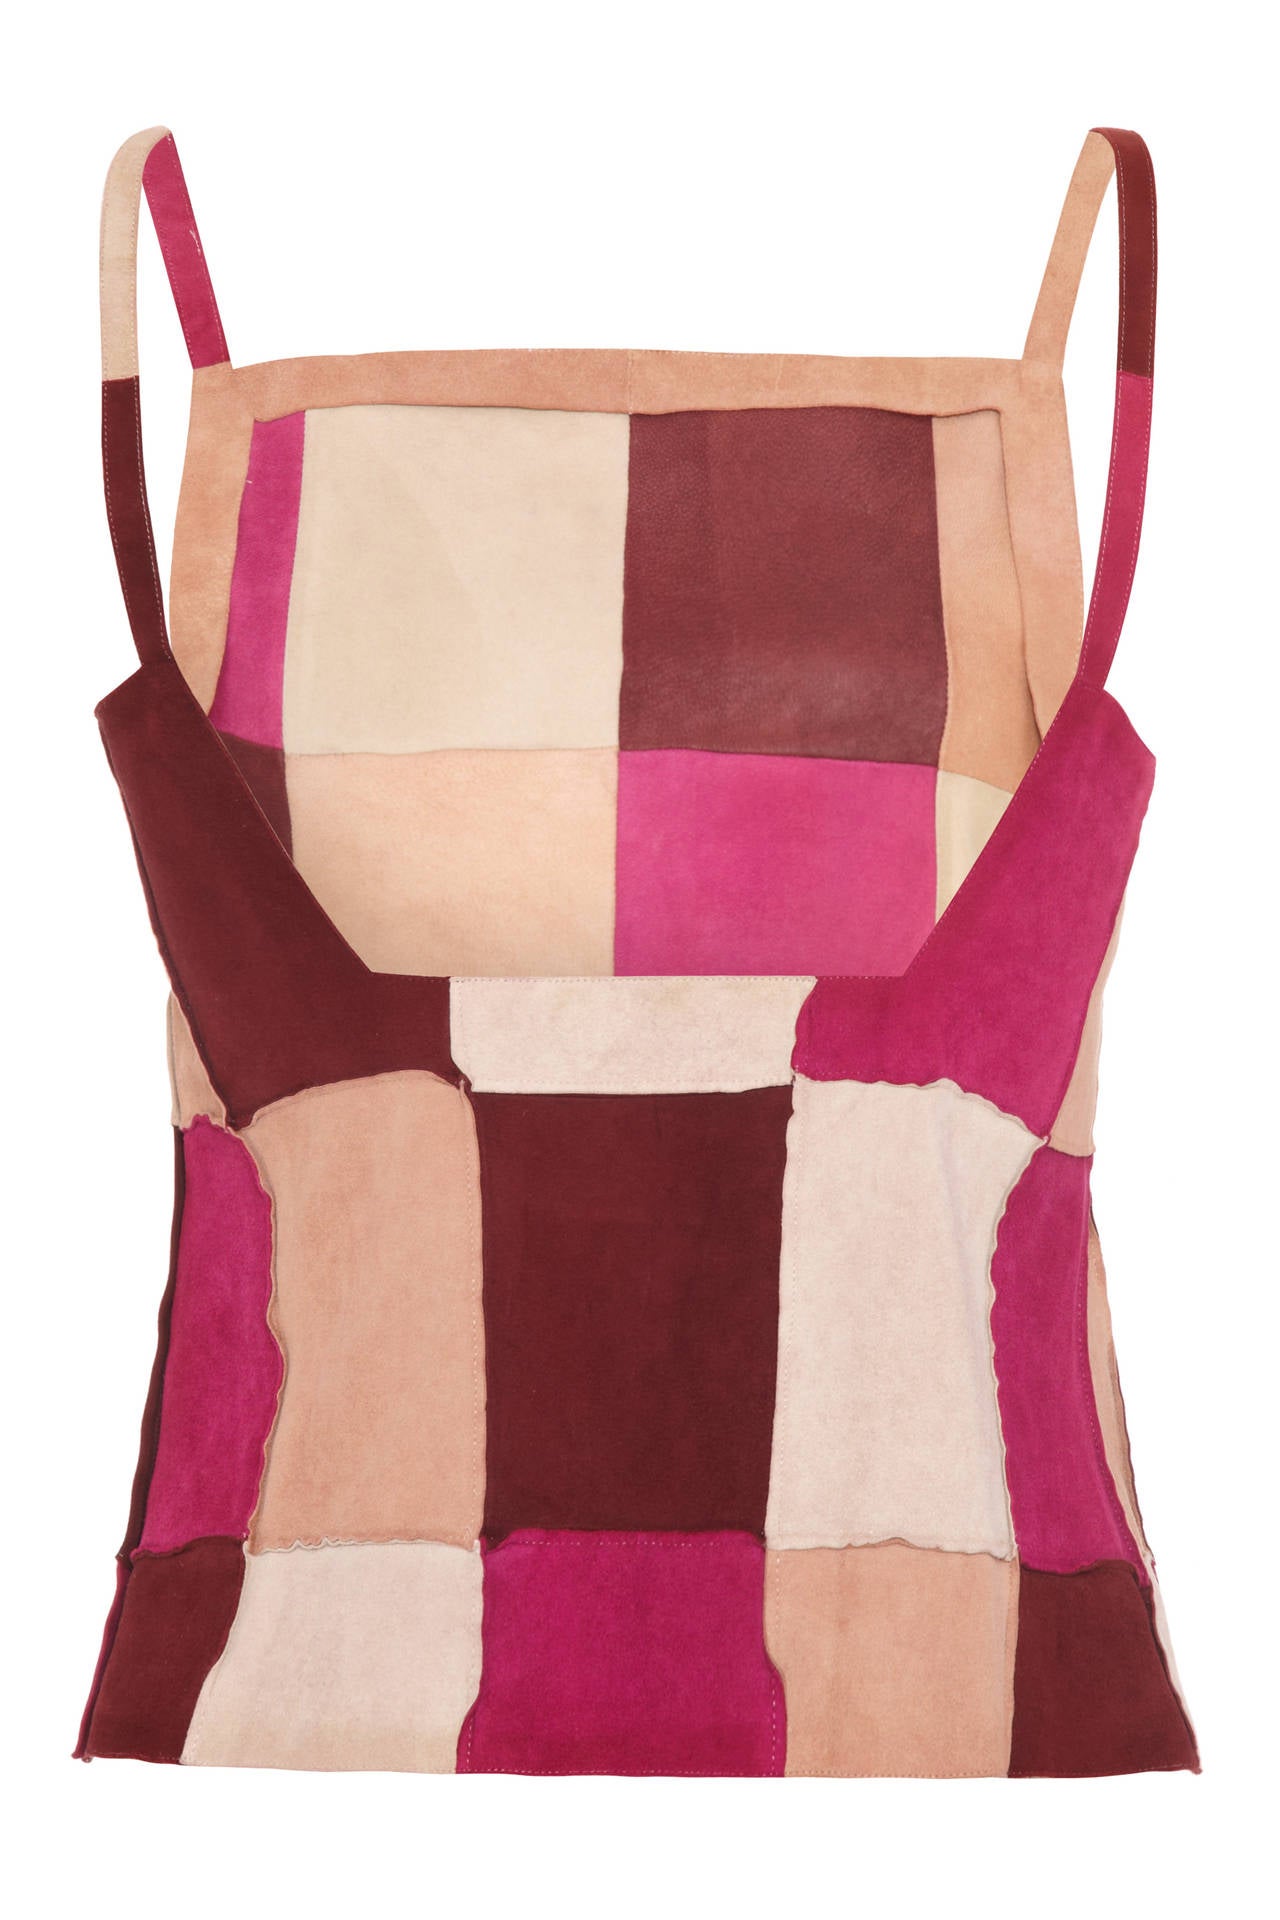 1970s inspired Chanel Identification 2000T suede patchwork tunic/vest top in colourful magenta, maroon, peach and beige.  This piece features a square cut low back, side zip fastening and is labelled size 38. 100% suede goat skin and in excellent